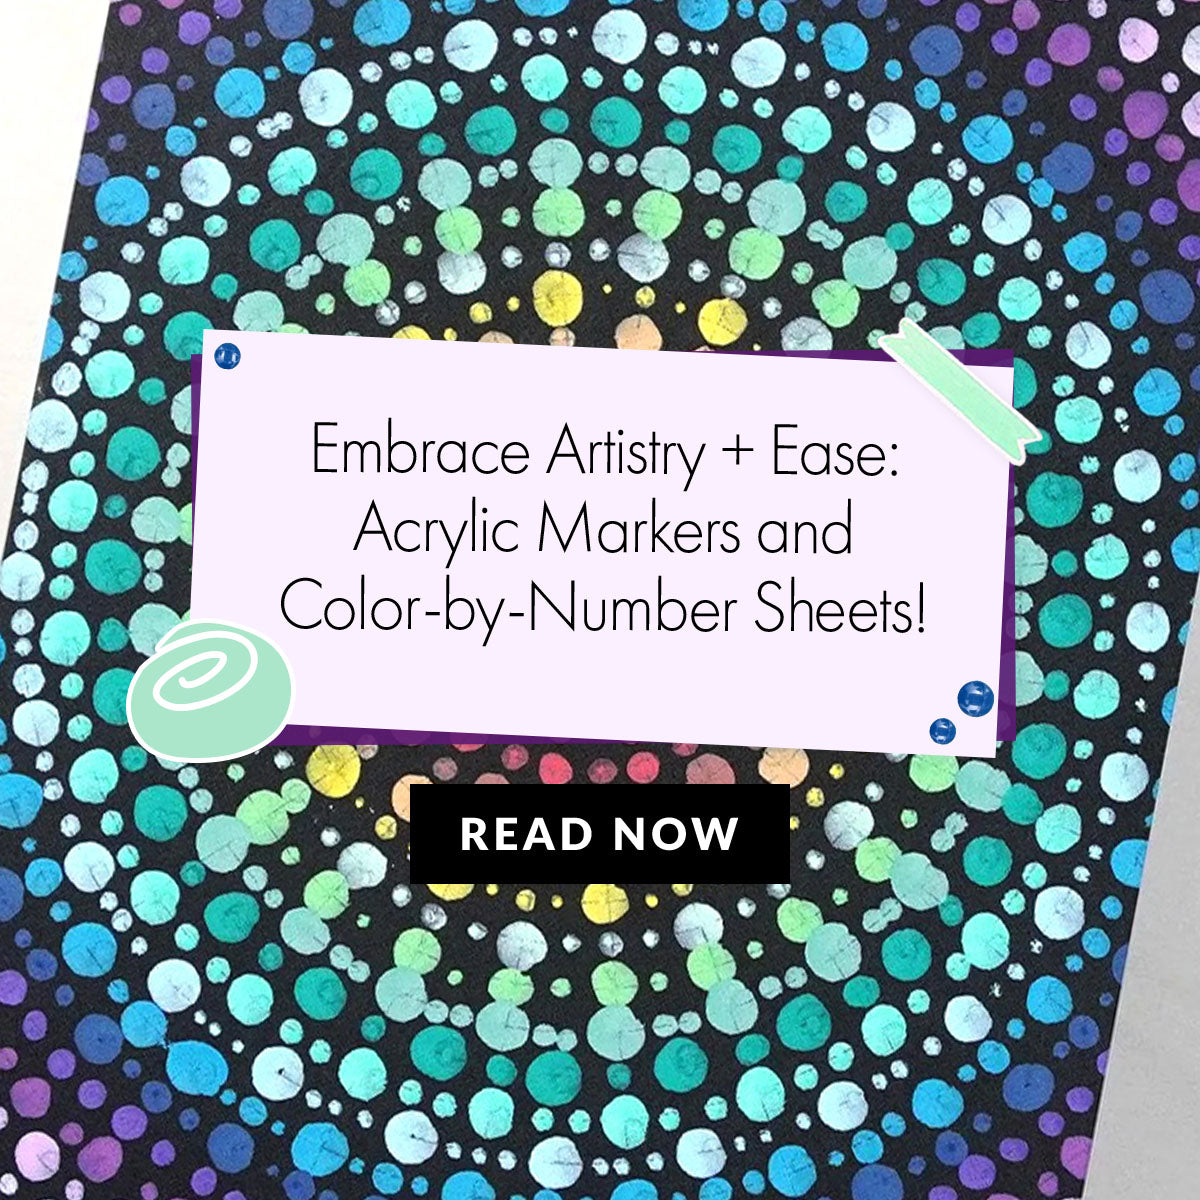 New Acrylic Markers and Color-by-Number Sheets: Everything You Need to Know!